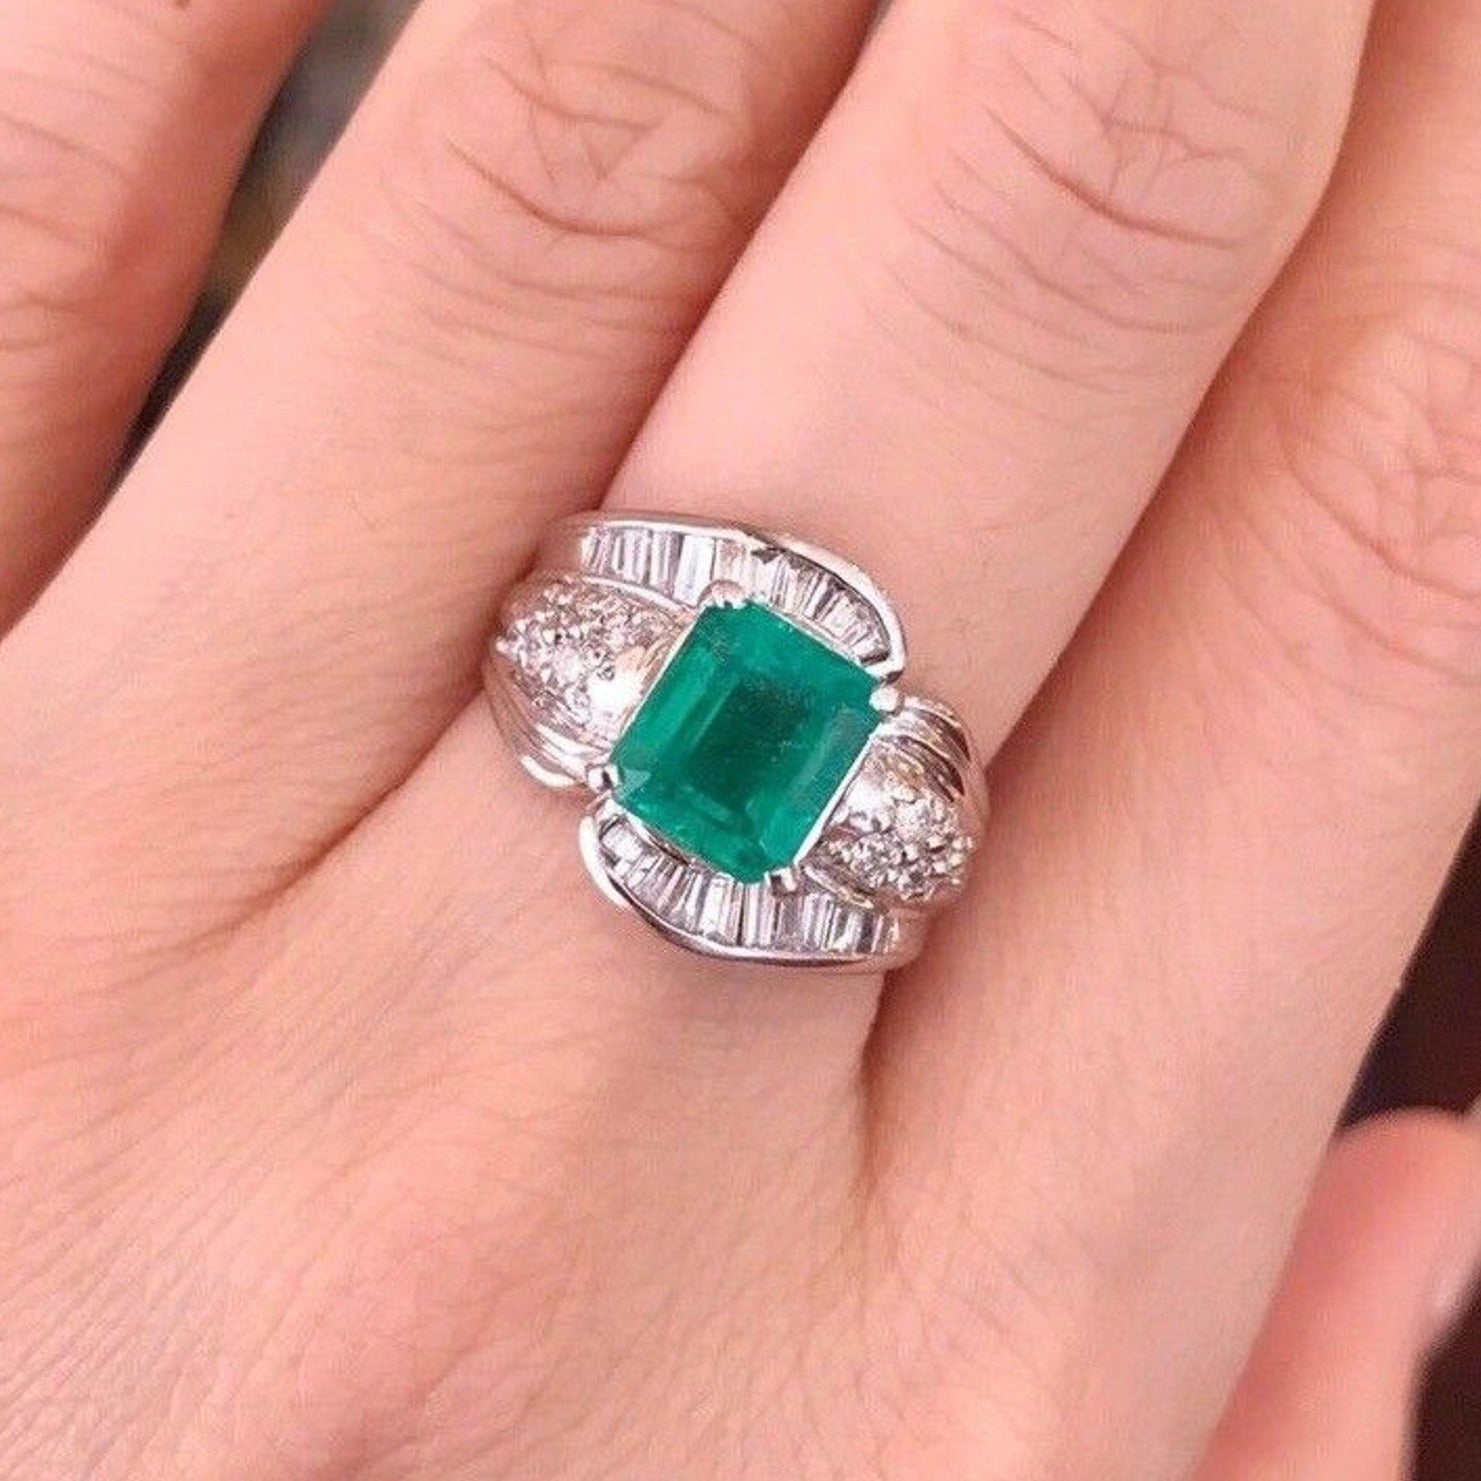 GIA Certified 2.52 ct Colombian Emerald and Diamond Ring in Platinum